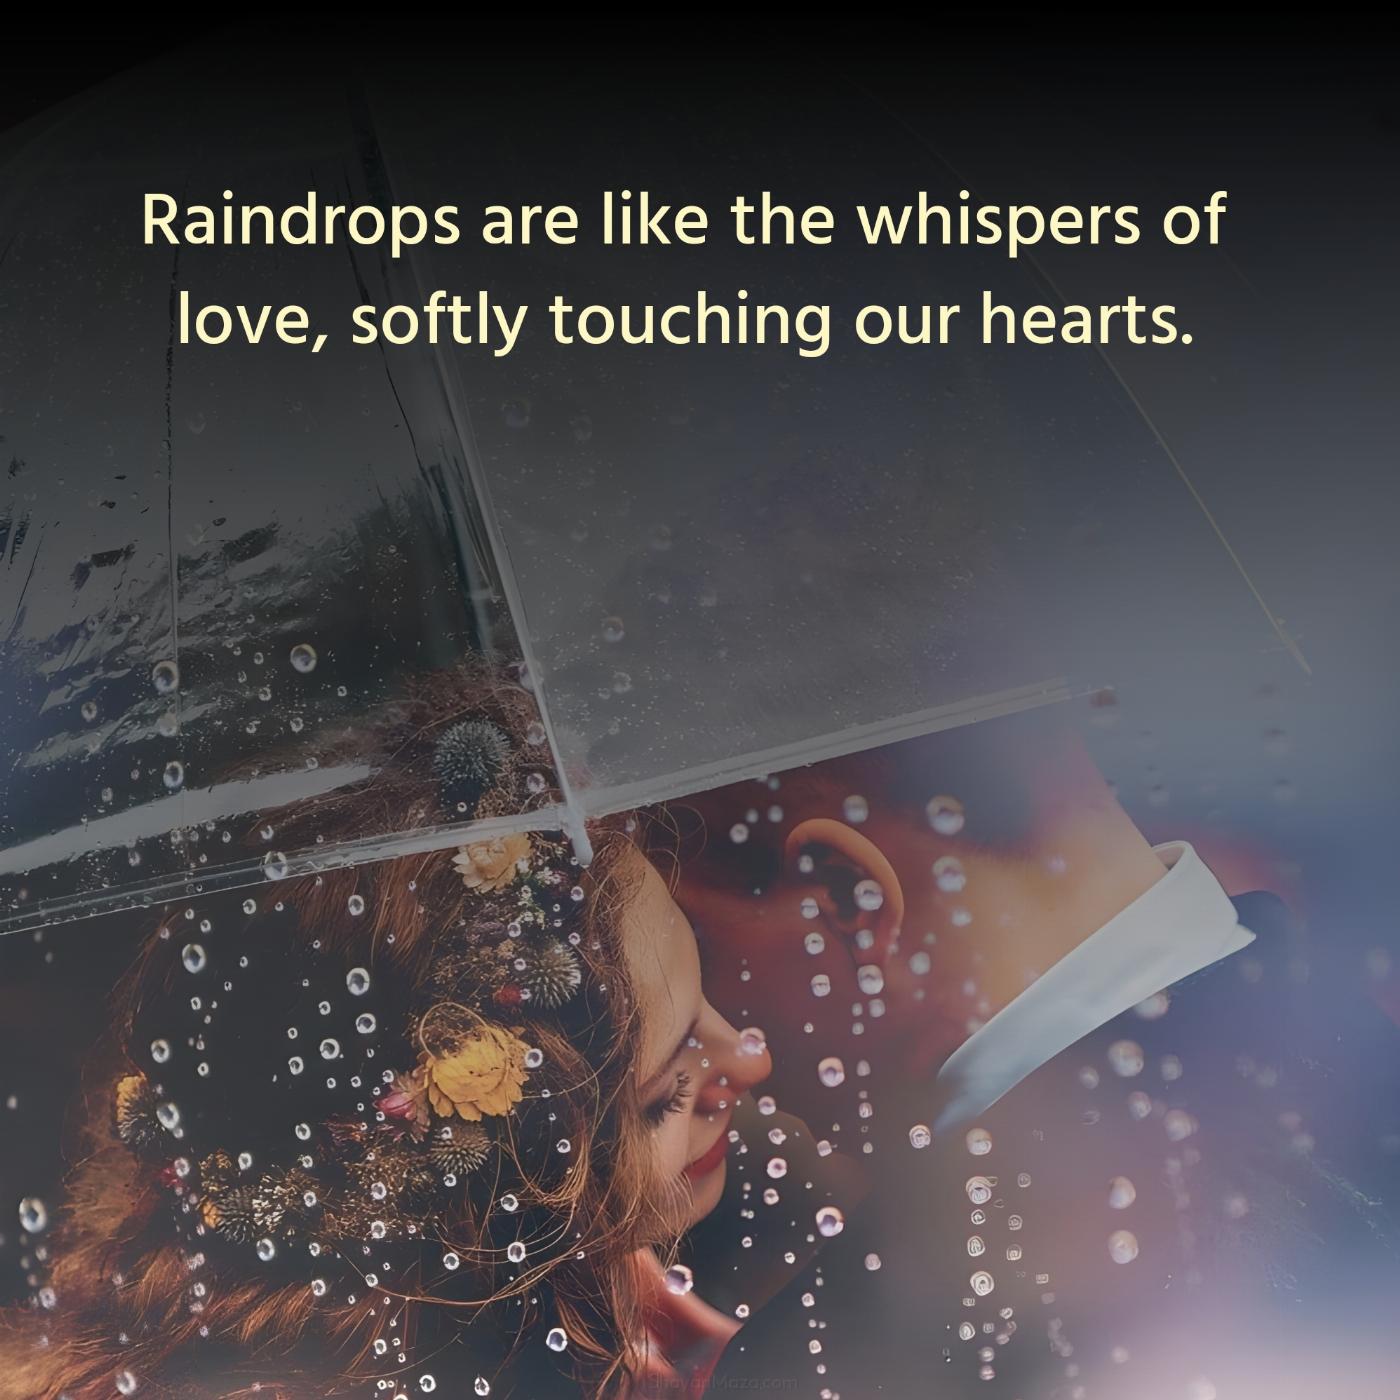 Raindrops are like the whispers of love softly touching our hearts